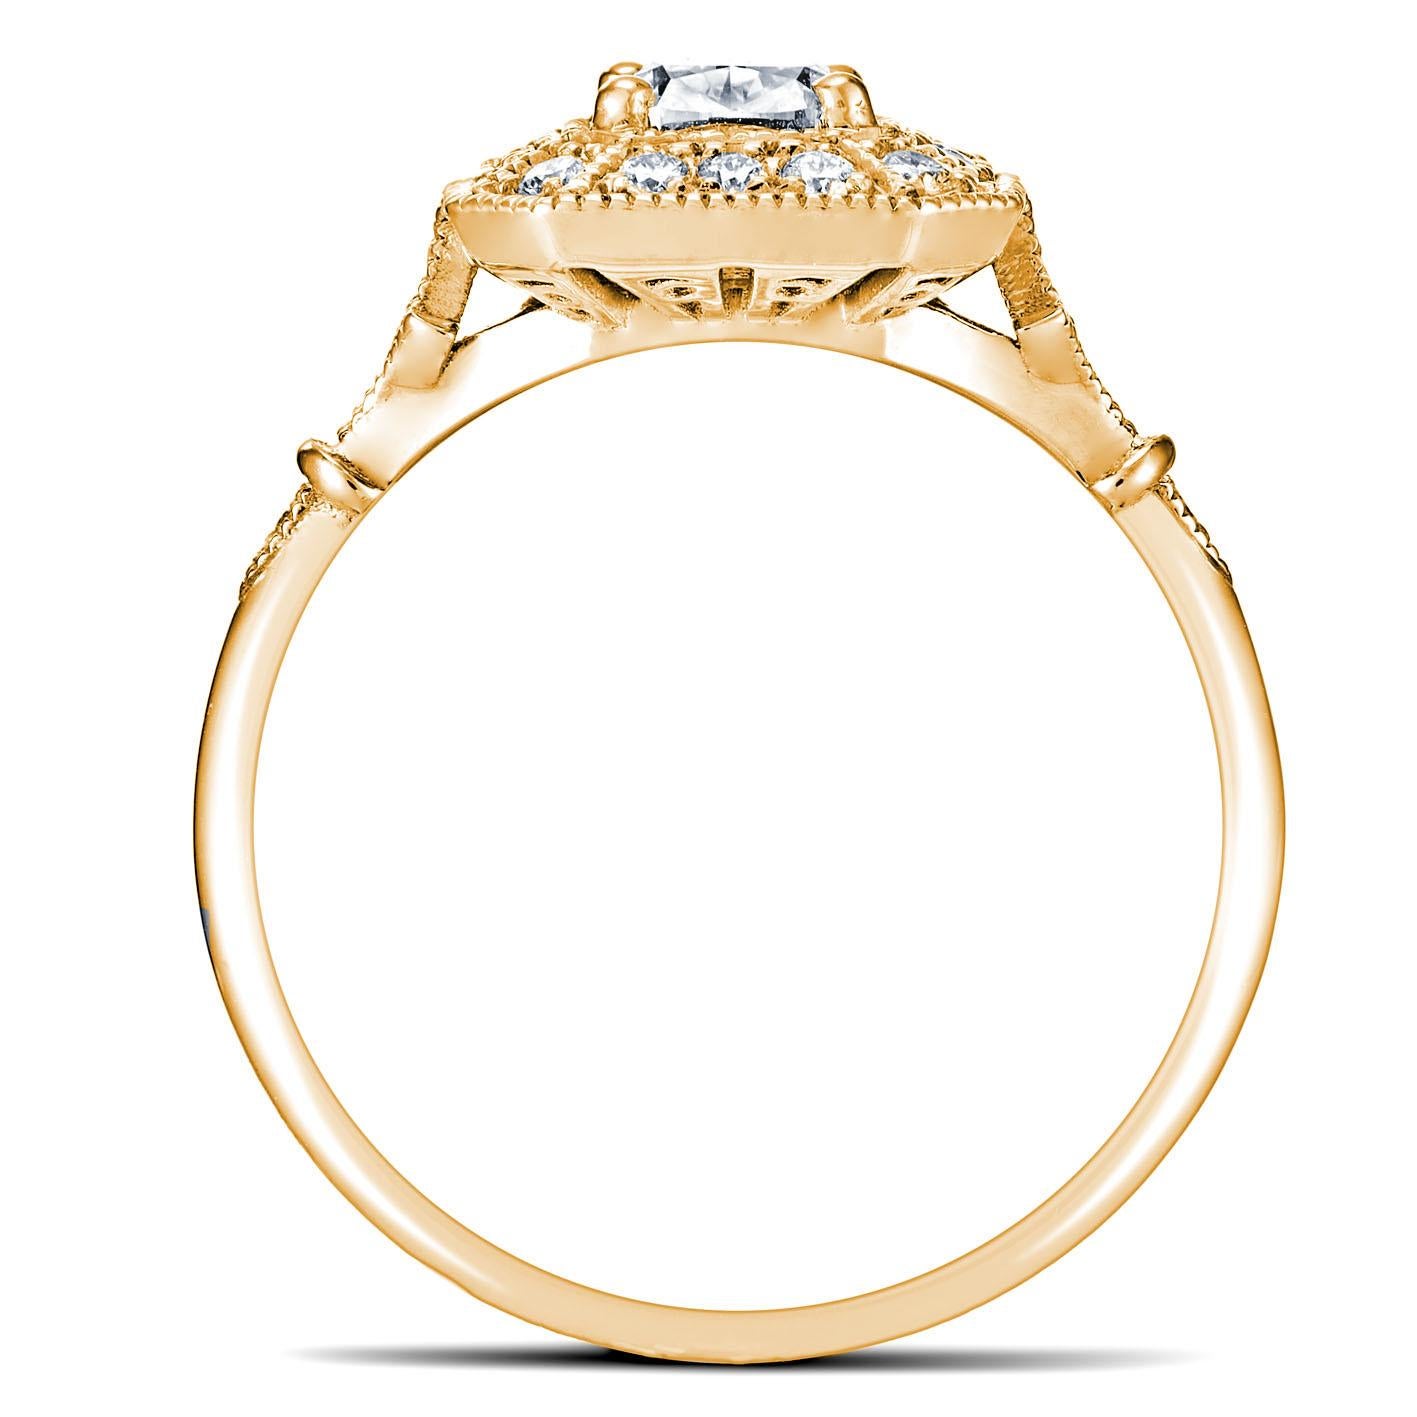 For Sale:  18k Yellow Gold 0.7 Ct Cushion Diamond Ring set with 0.19 Cts of Diamonds 2